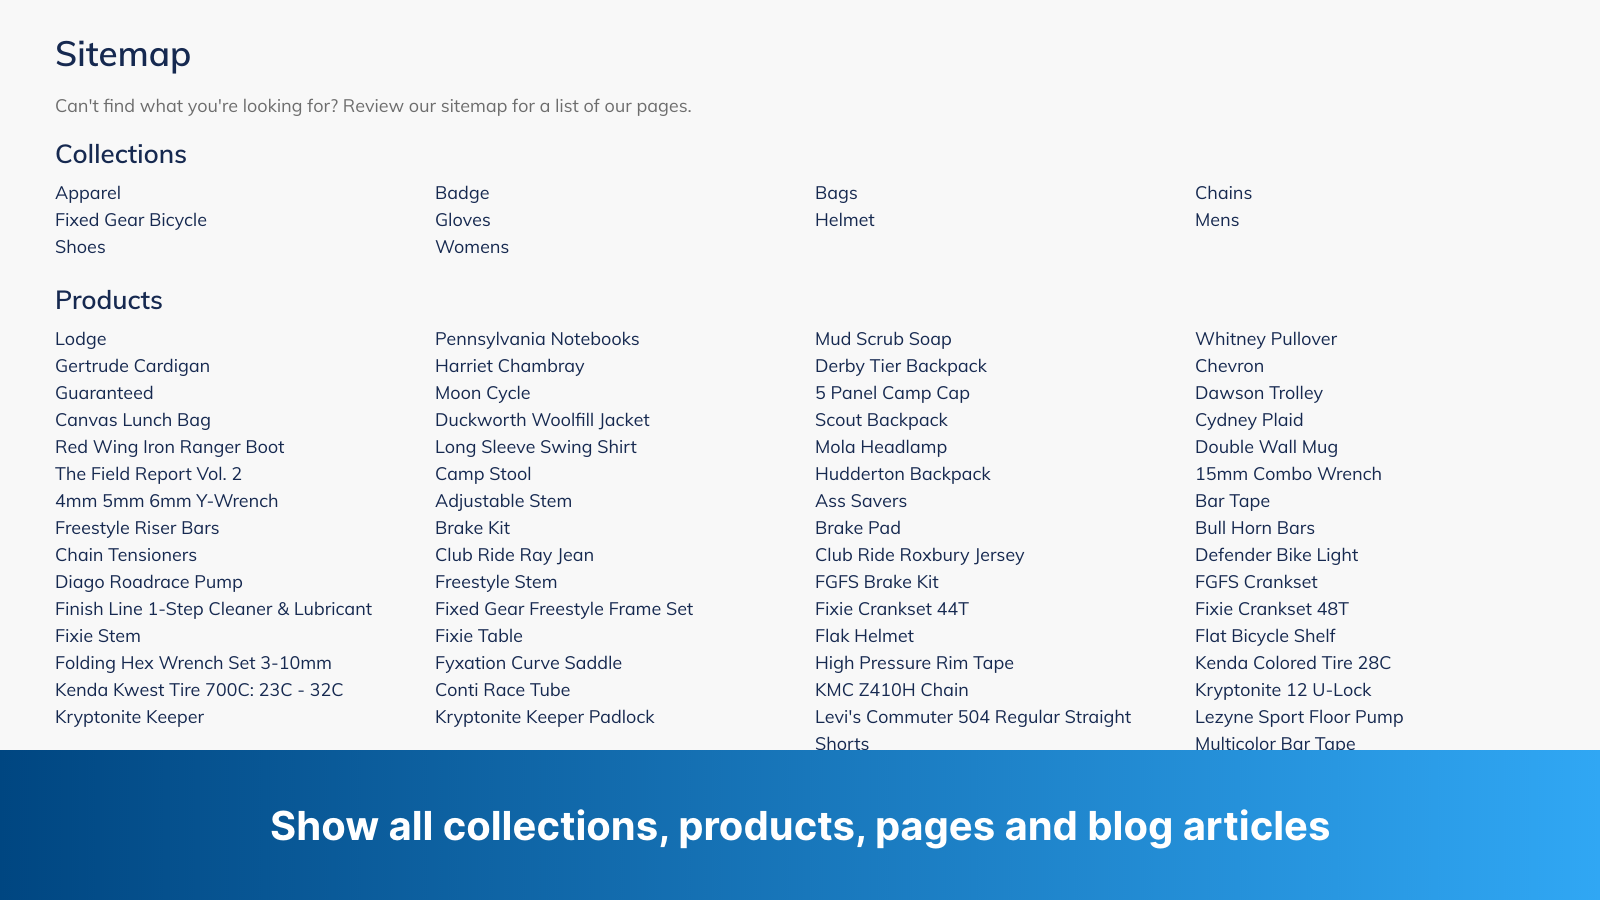 Show all collections, products, pages and blog articles